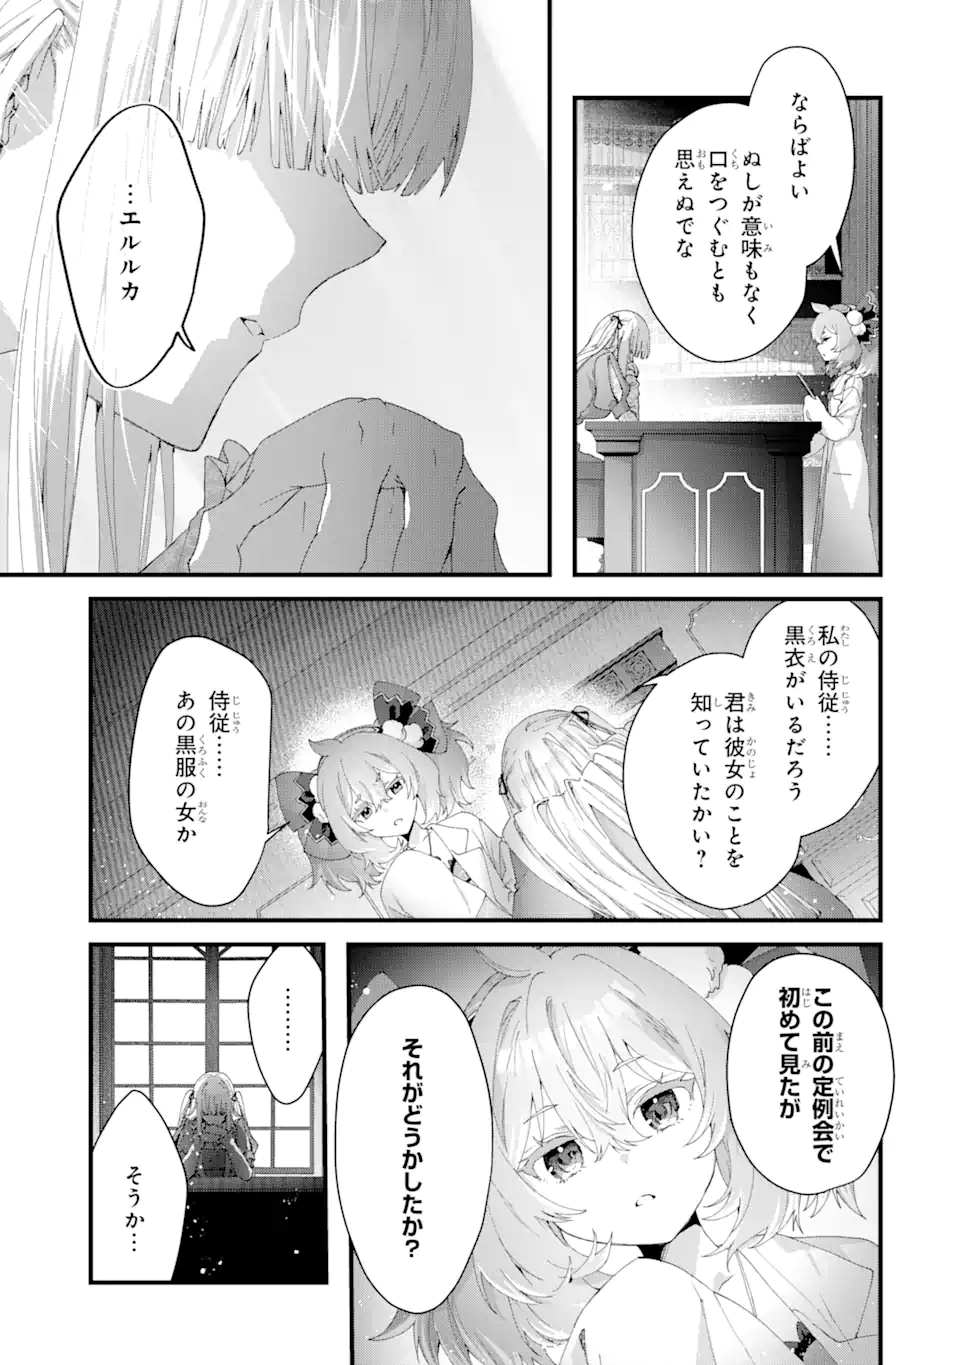 Ousama no Propose - Chapter 11.3 - Page 3